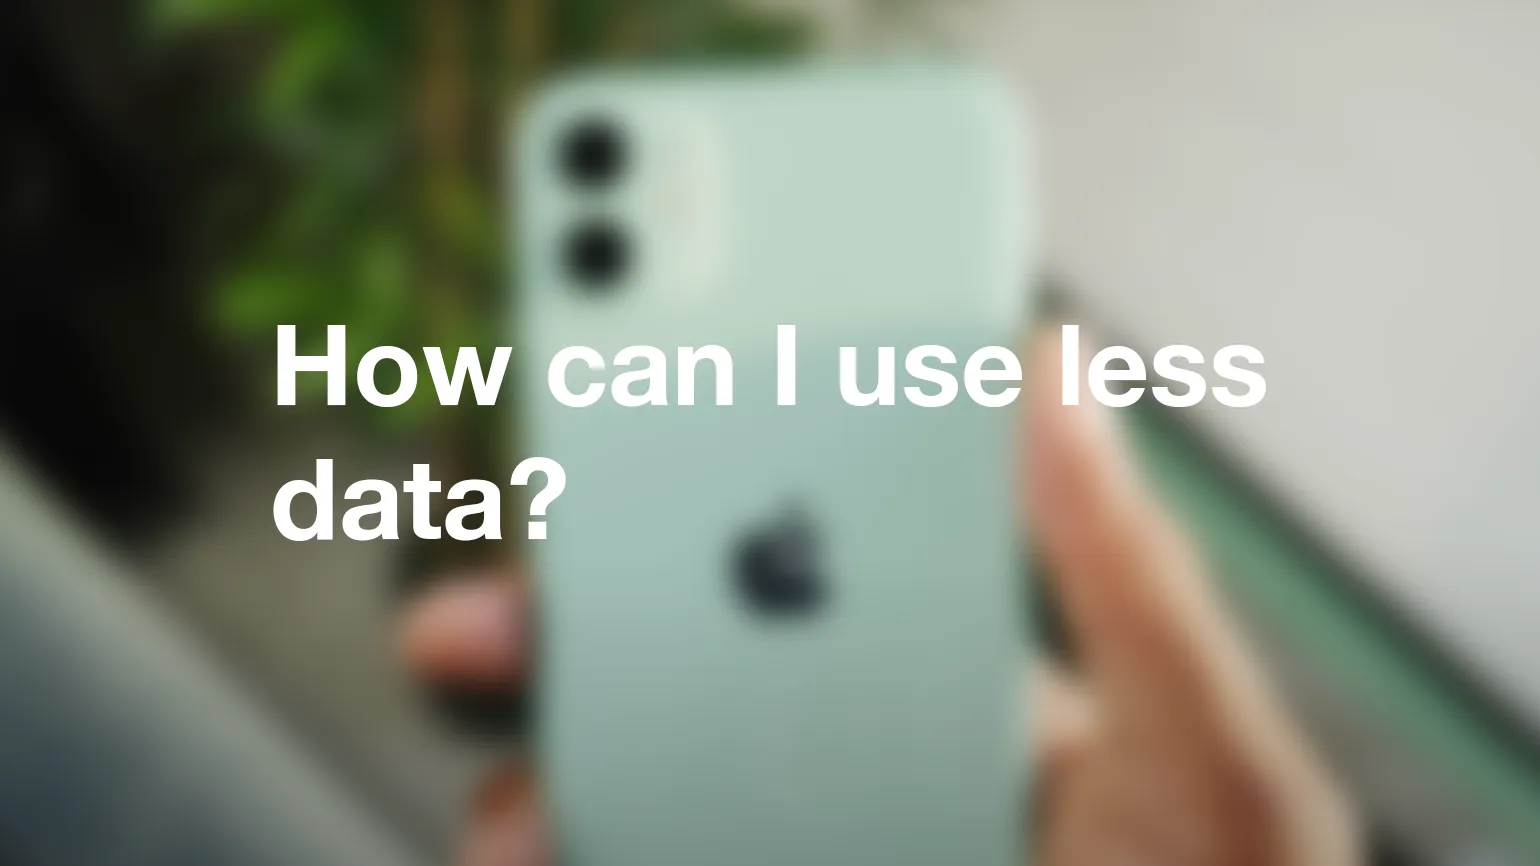 How can I use less data?